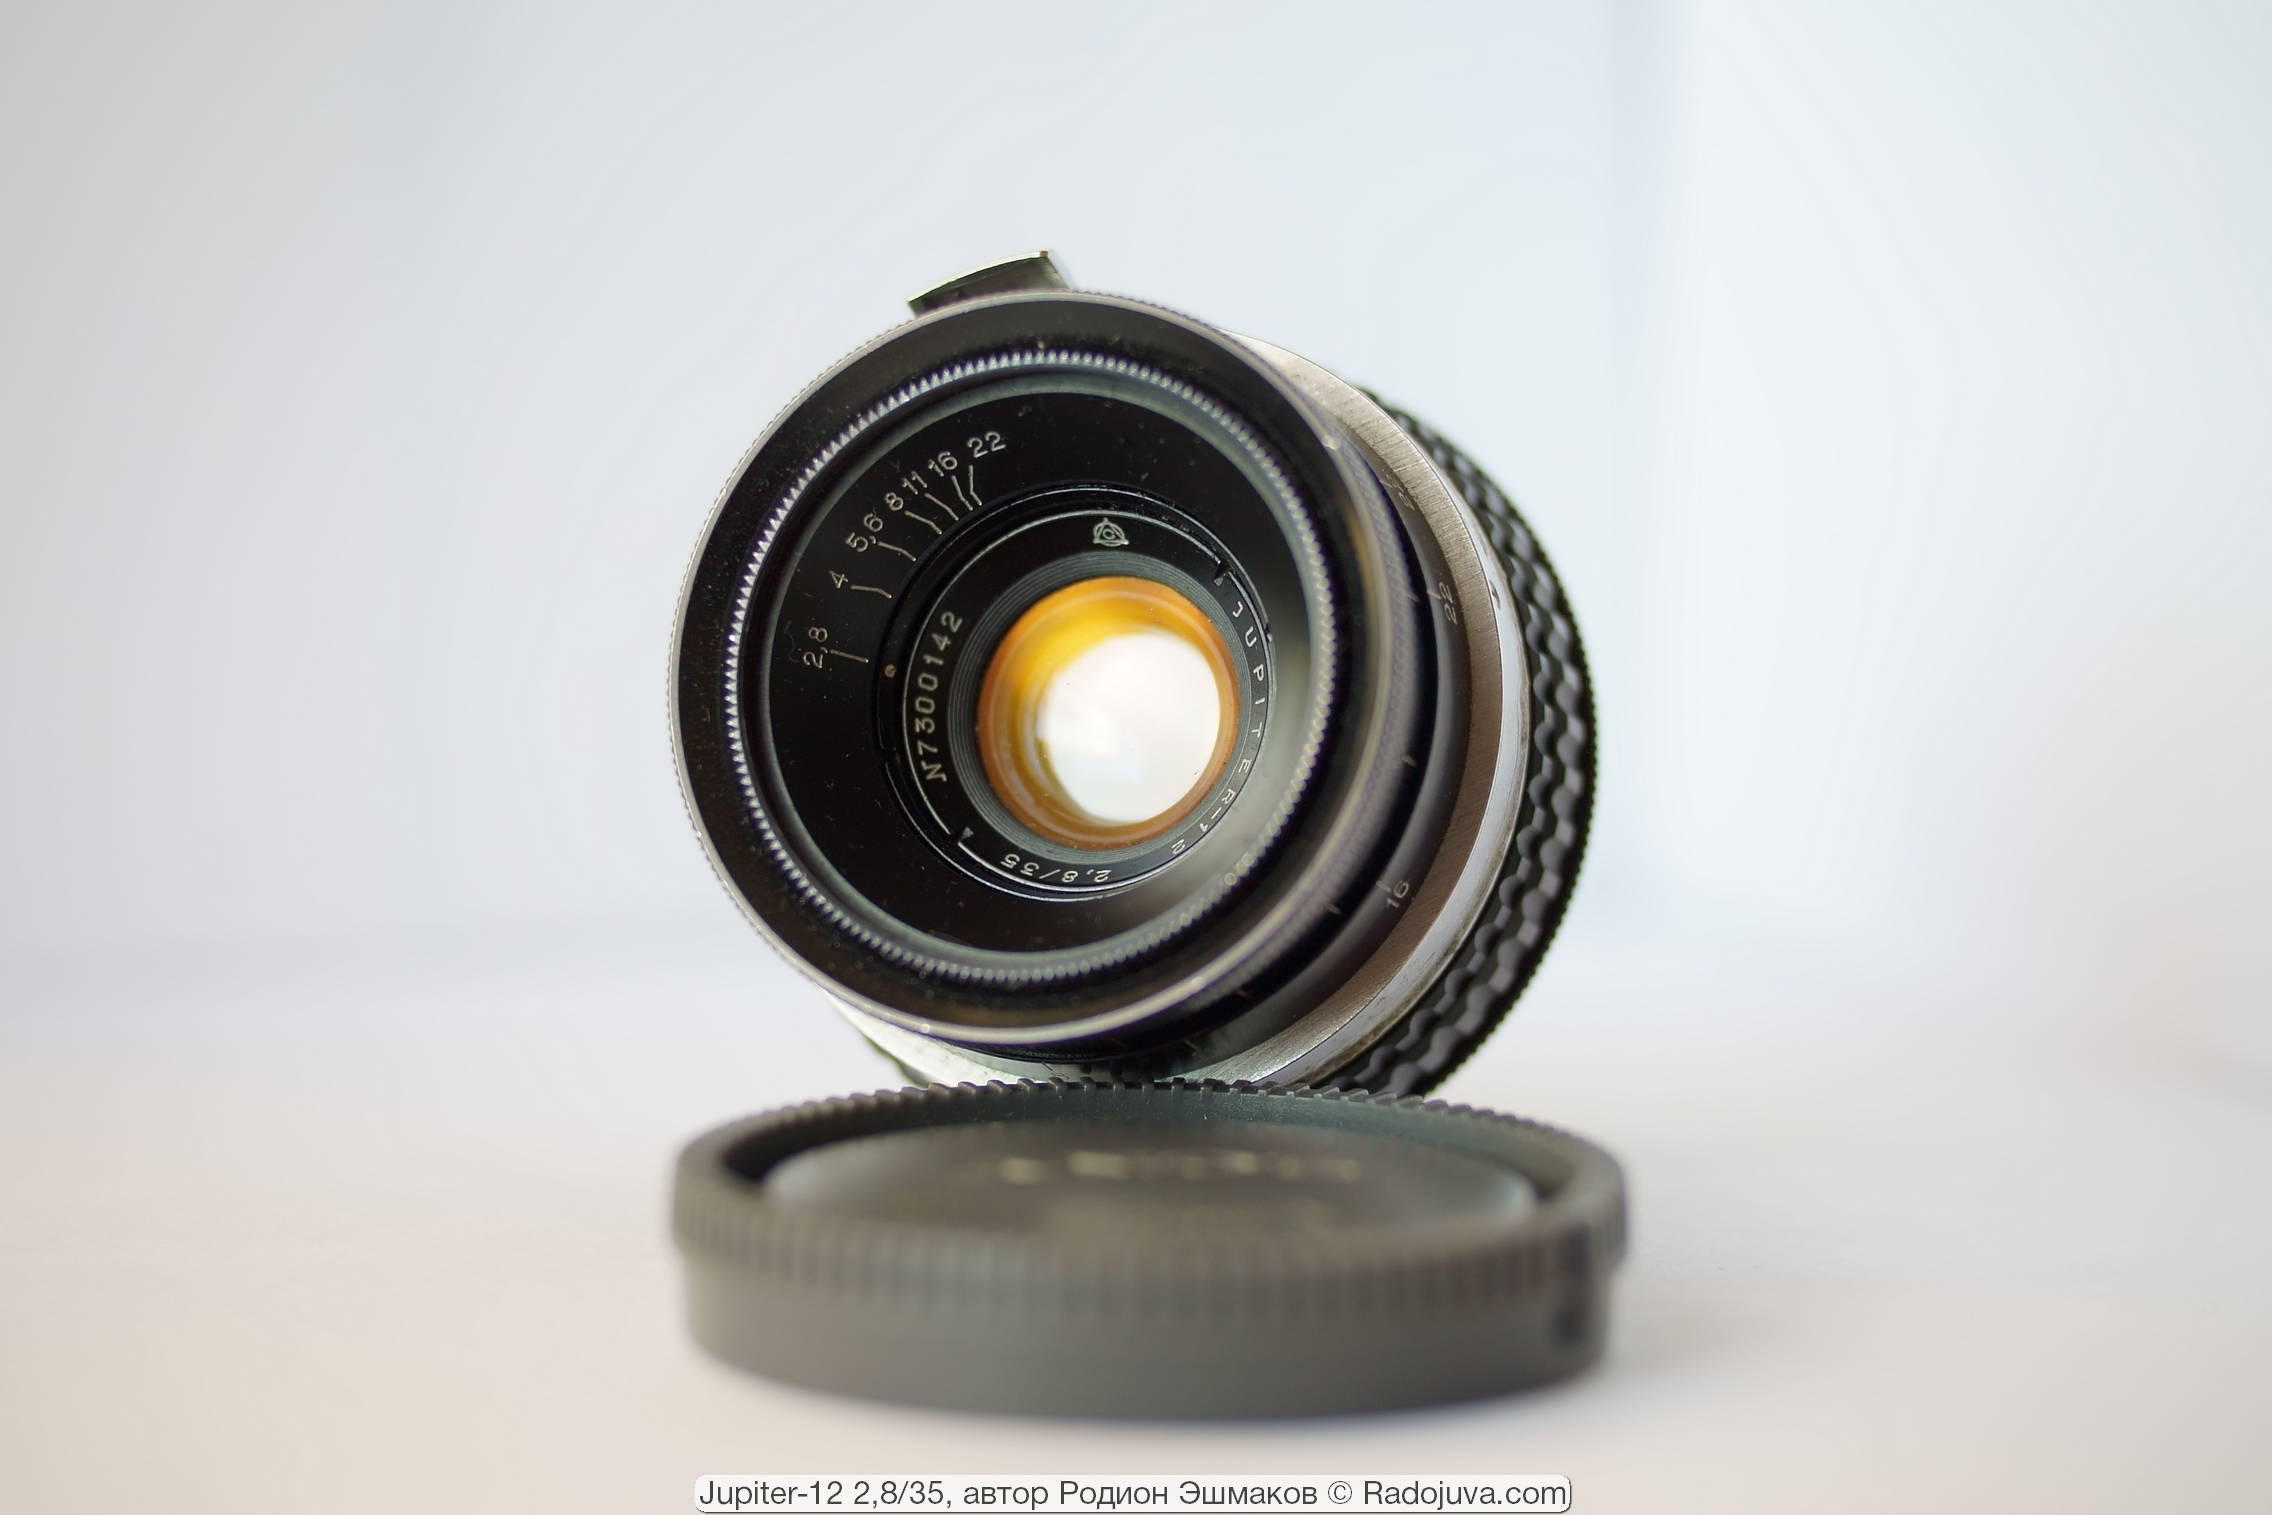 The aperture control ring is located on the side of the front lens.